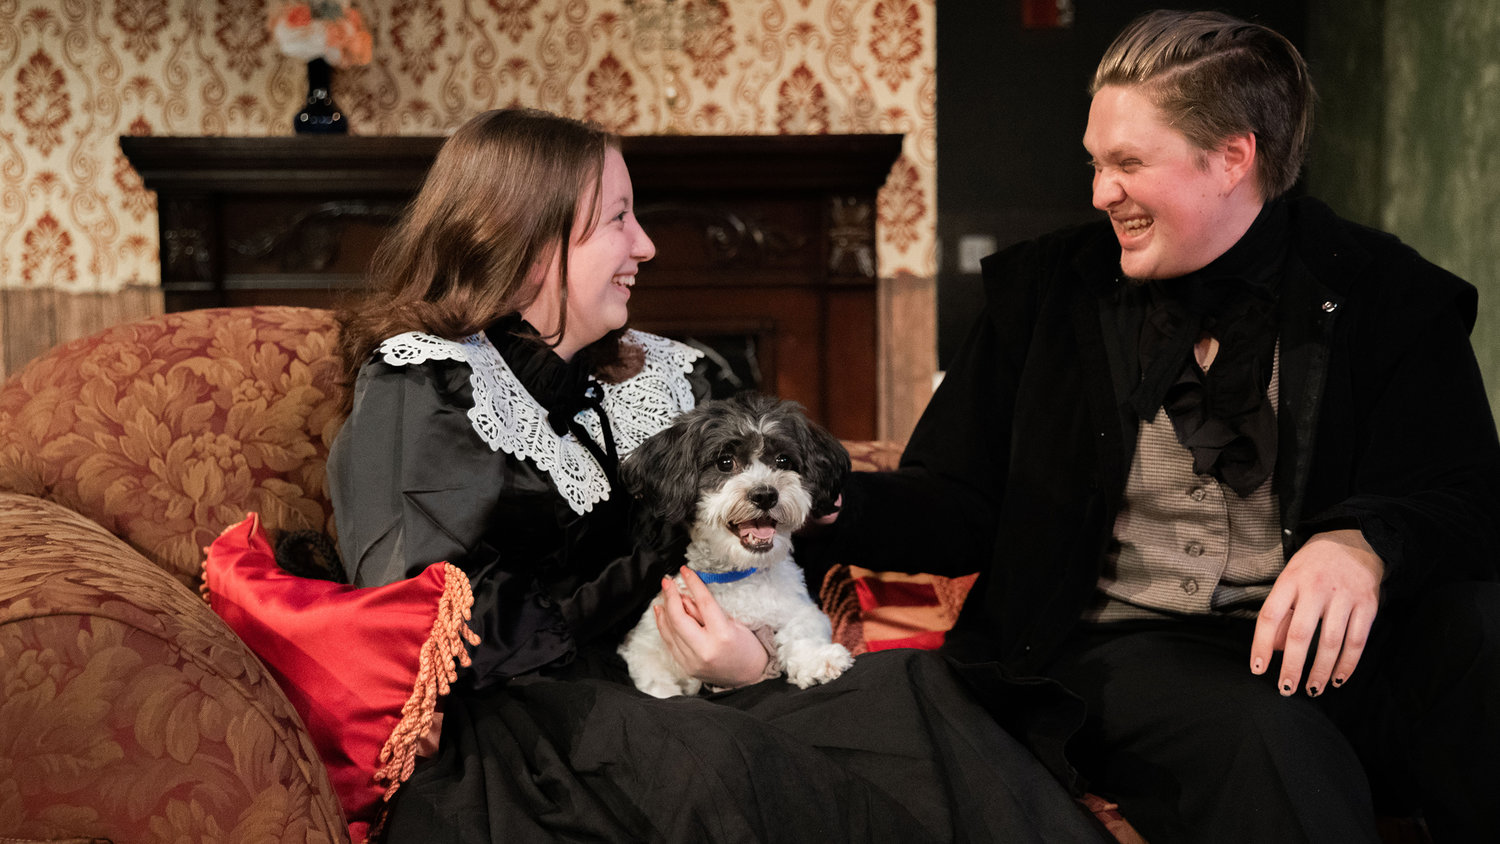 Alyssa Graves playing “Elizabeth Barrett,” and Derek Kealoha playing “Robert Browning,” smile while performing on stage with a dog named Ozzy playing “Flush,” during dress rehearsals for “Leaving 50 Wimpole Street,” a play by John Pratt directed by Emmy Kreilkamp presented by the Centralia College Theatre program.